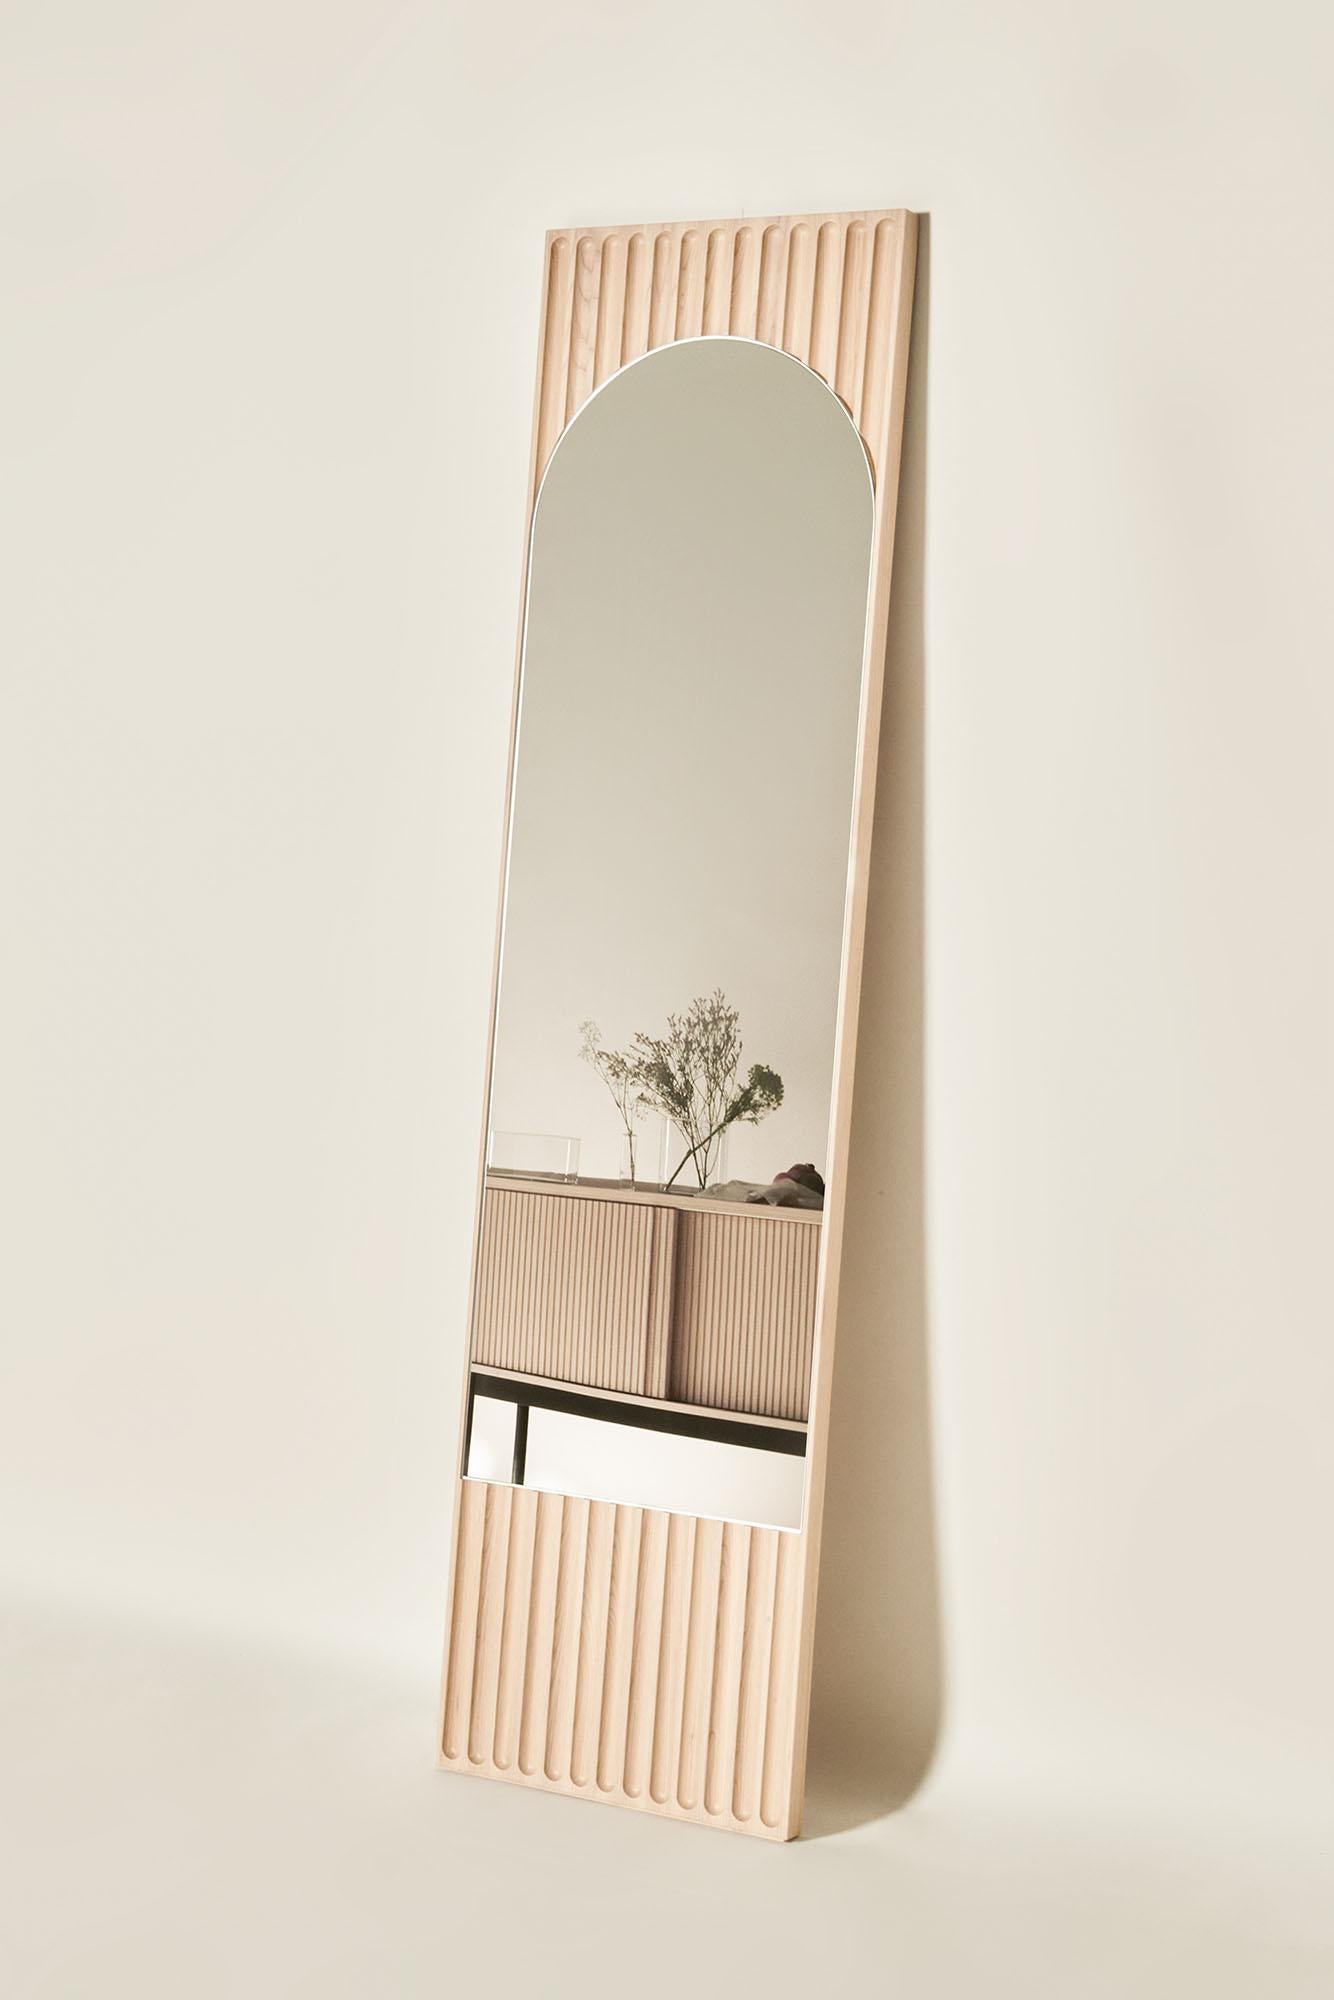 Oiled Tutto Sesto Solid Wood Rectangular Mirror, Ash in Natural Finish, Contemporary For Sale